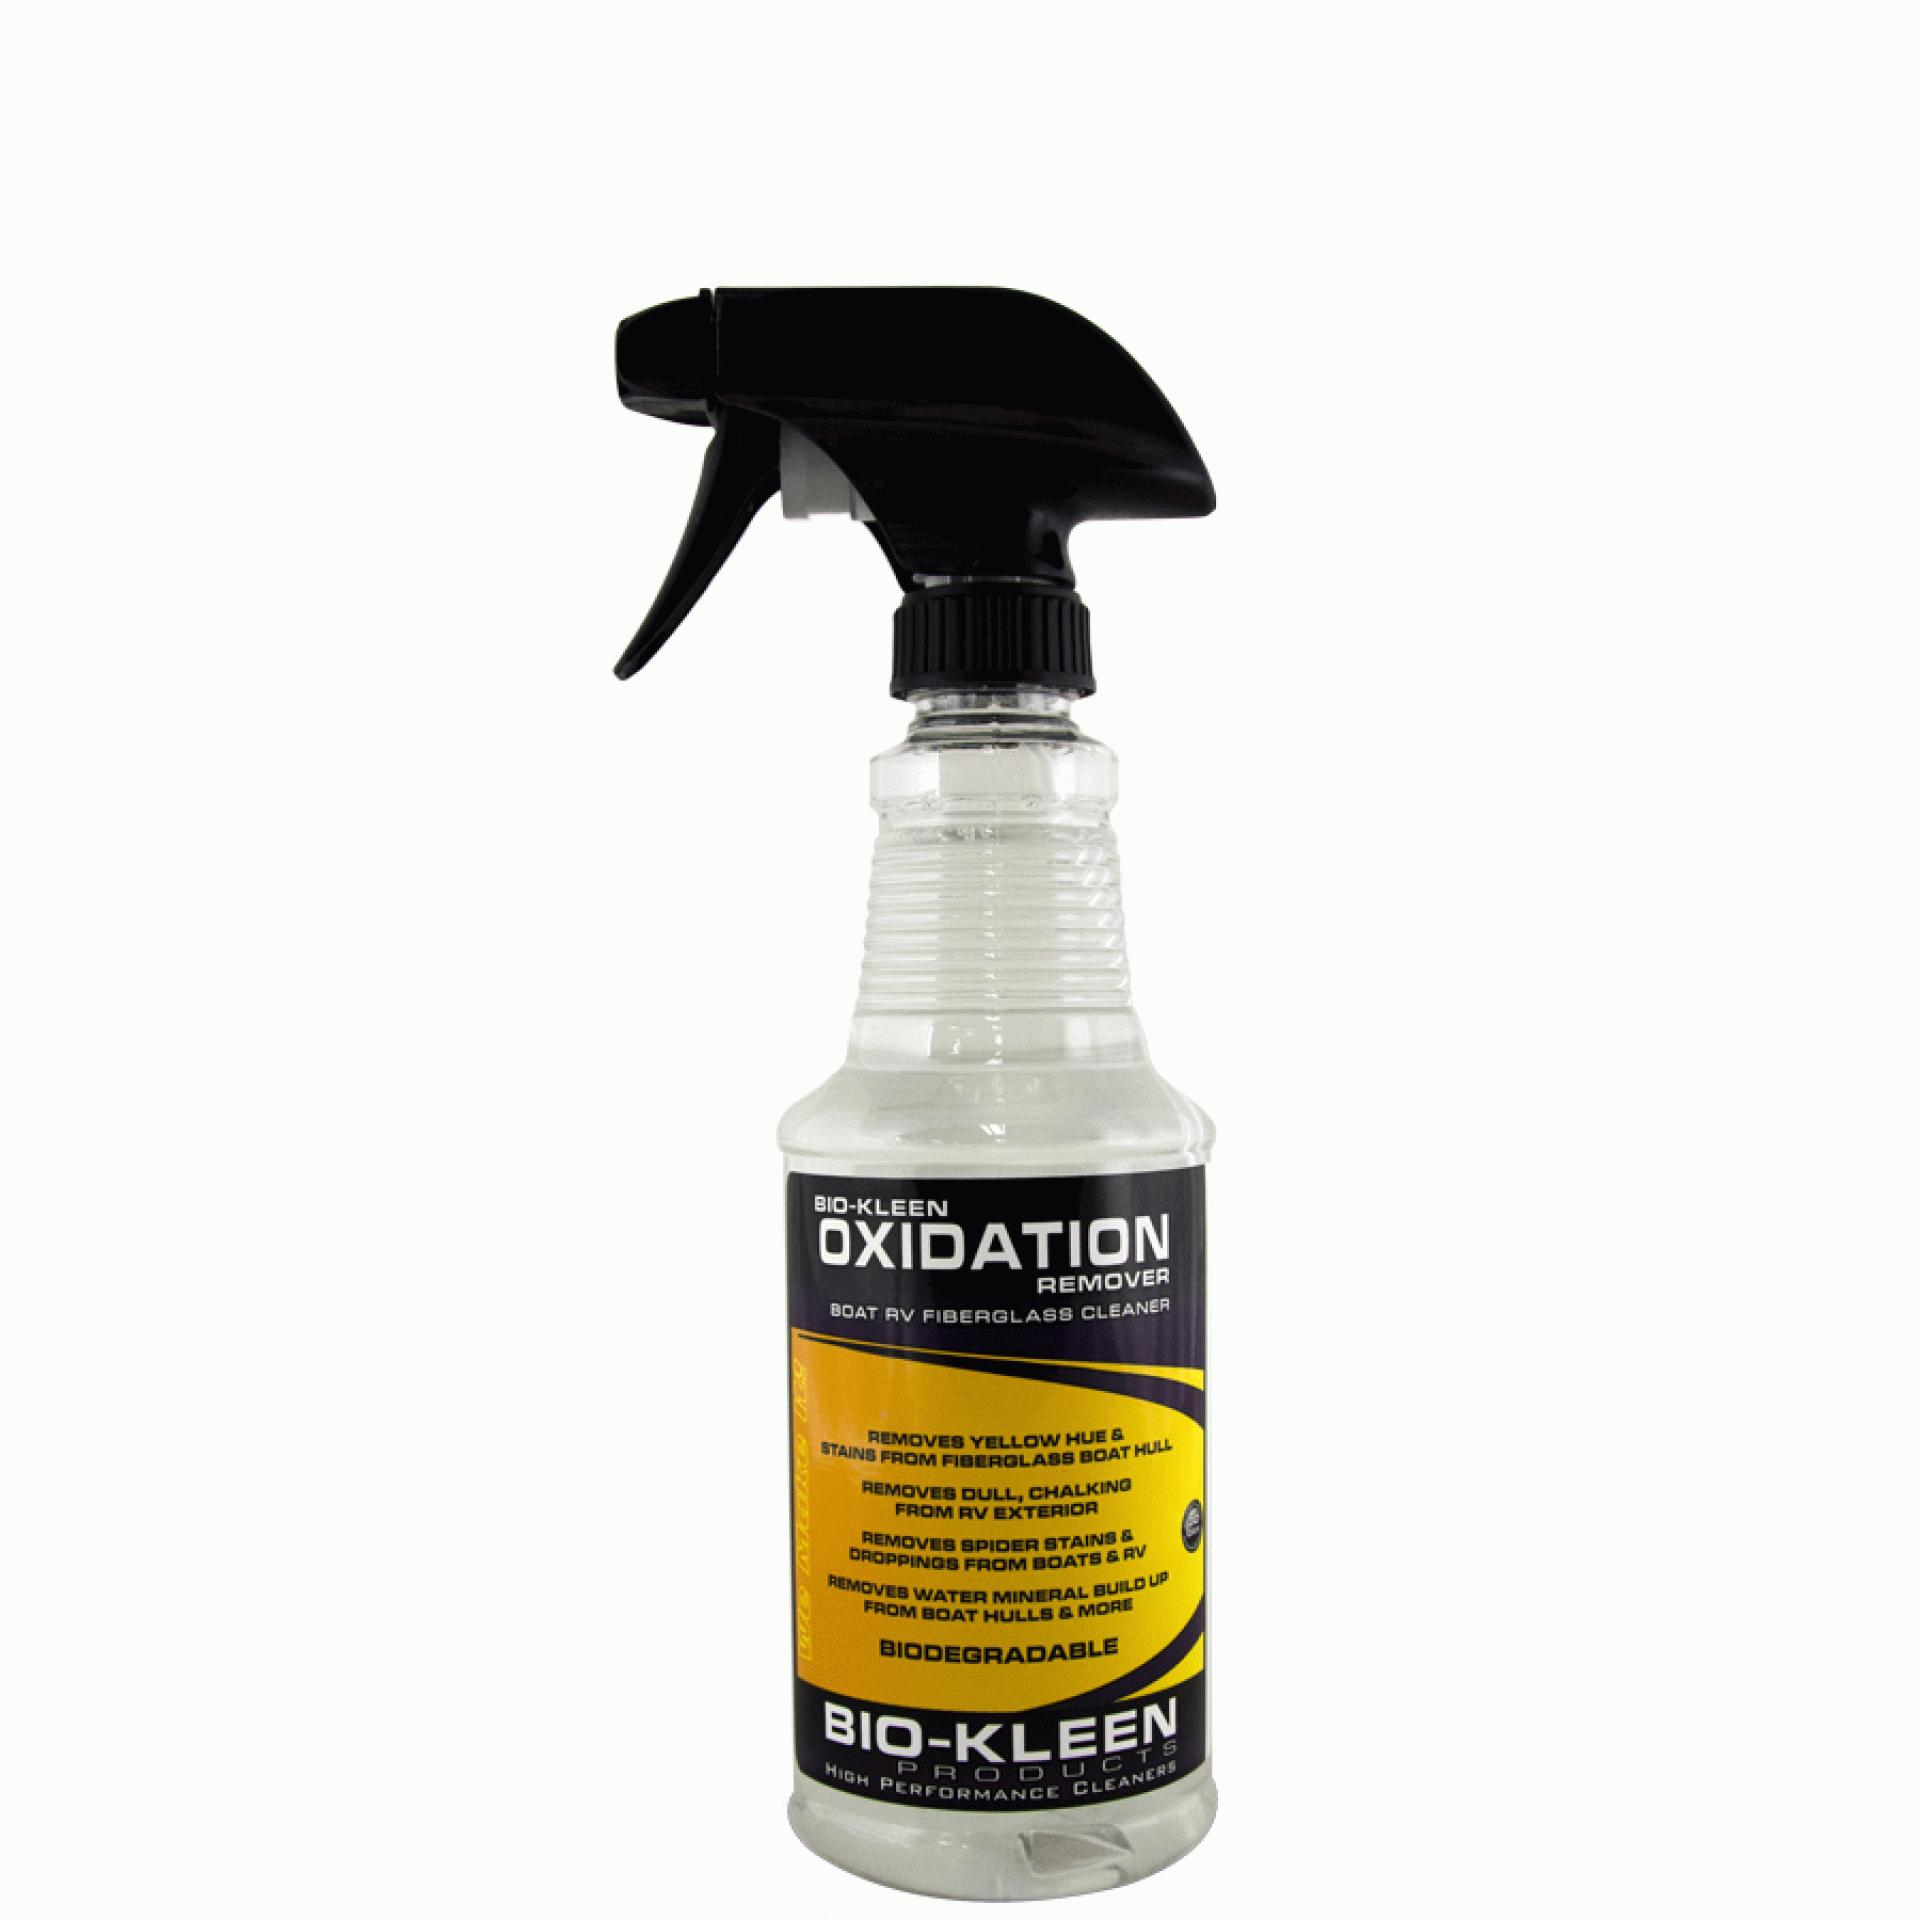 BIO-KLEEN PRODUCTS INC | M00705 | Oxidation Remover 16 Oz.